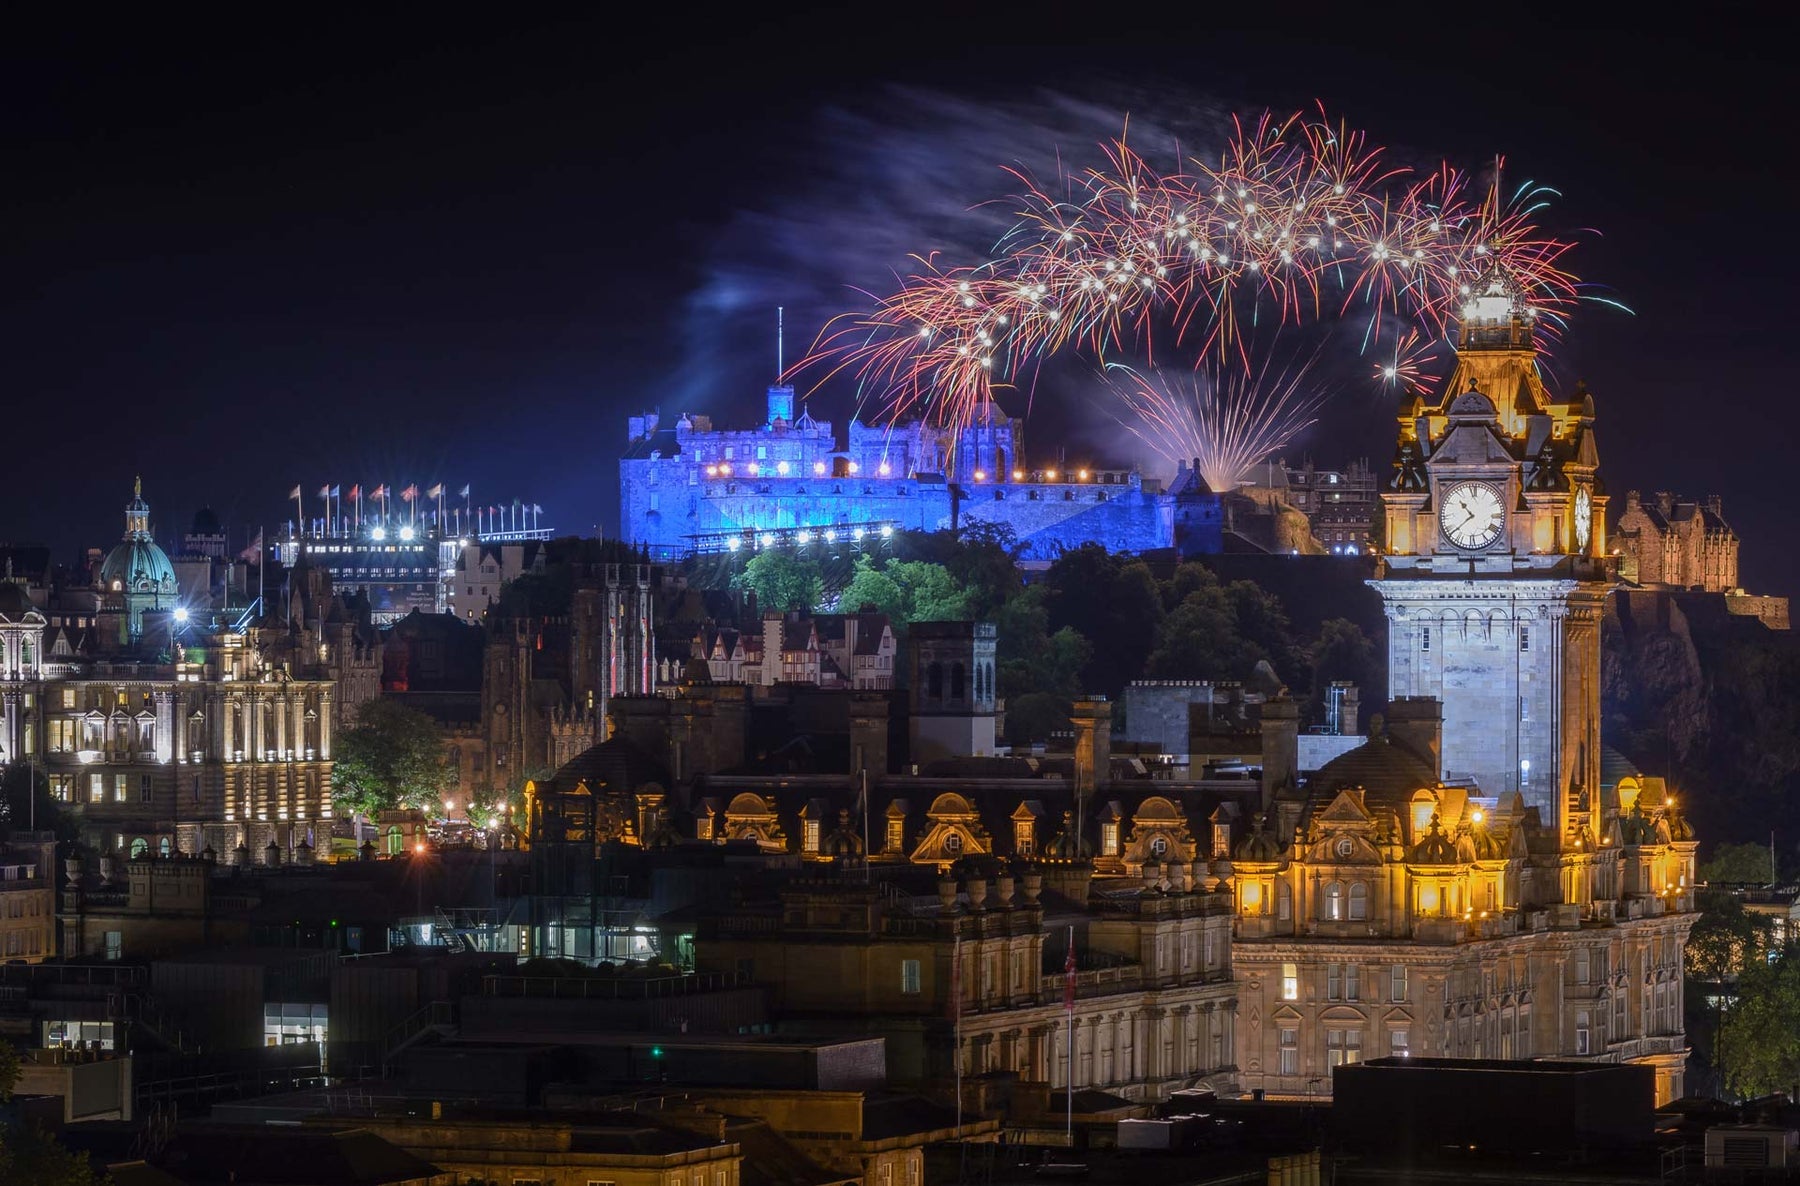 New Year's Eve in Edinburgh: Best Fireworks Viewing Spots and Tips for a Great Night in the City